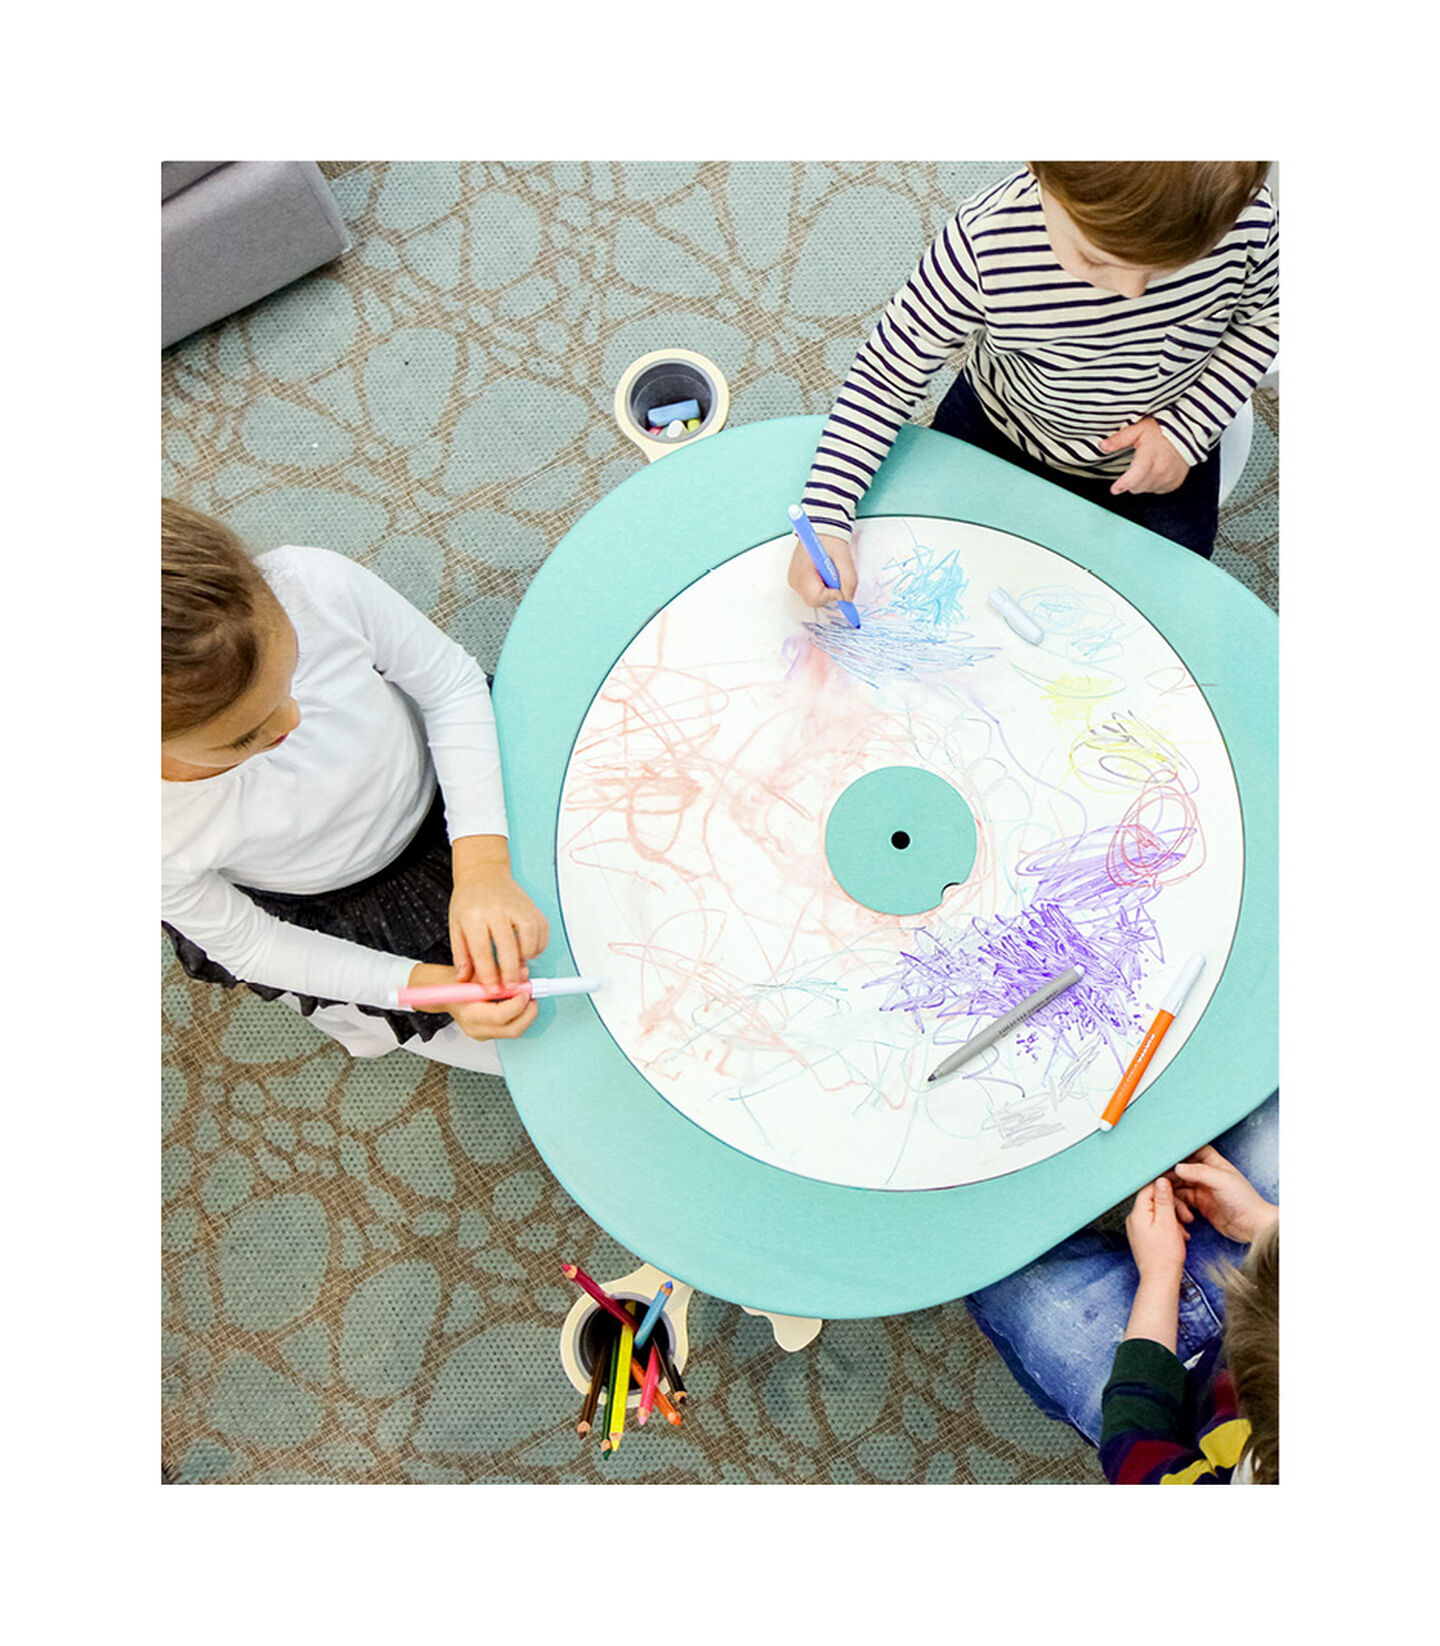 Stokke® MuTable™ Table, Whiteboard. Acccessories. view 4